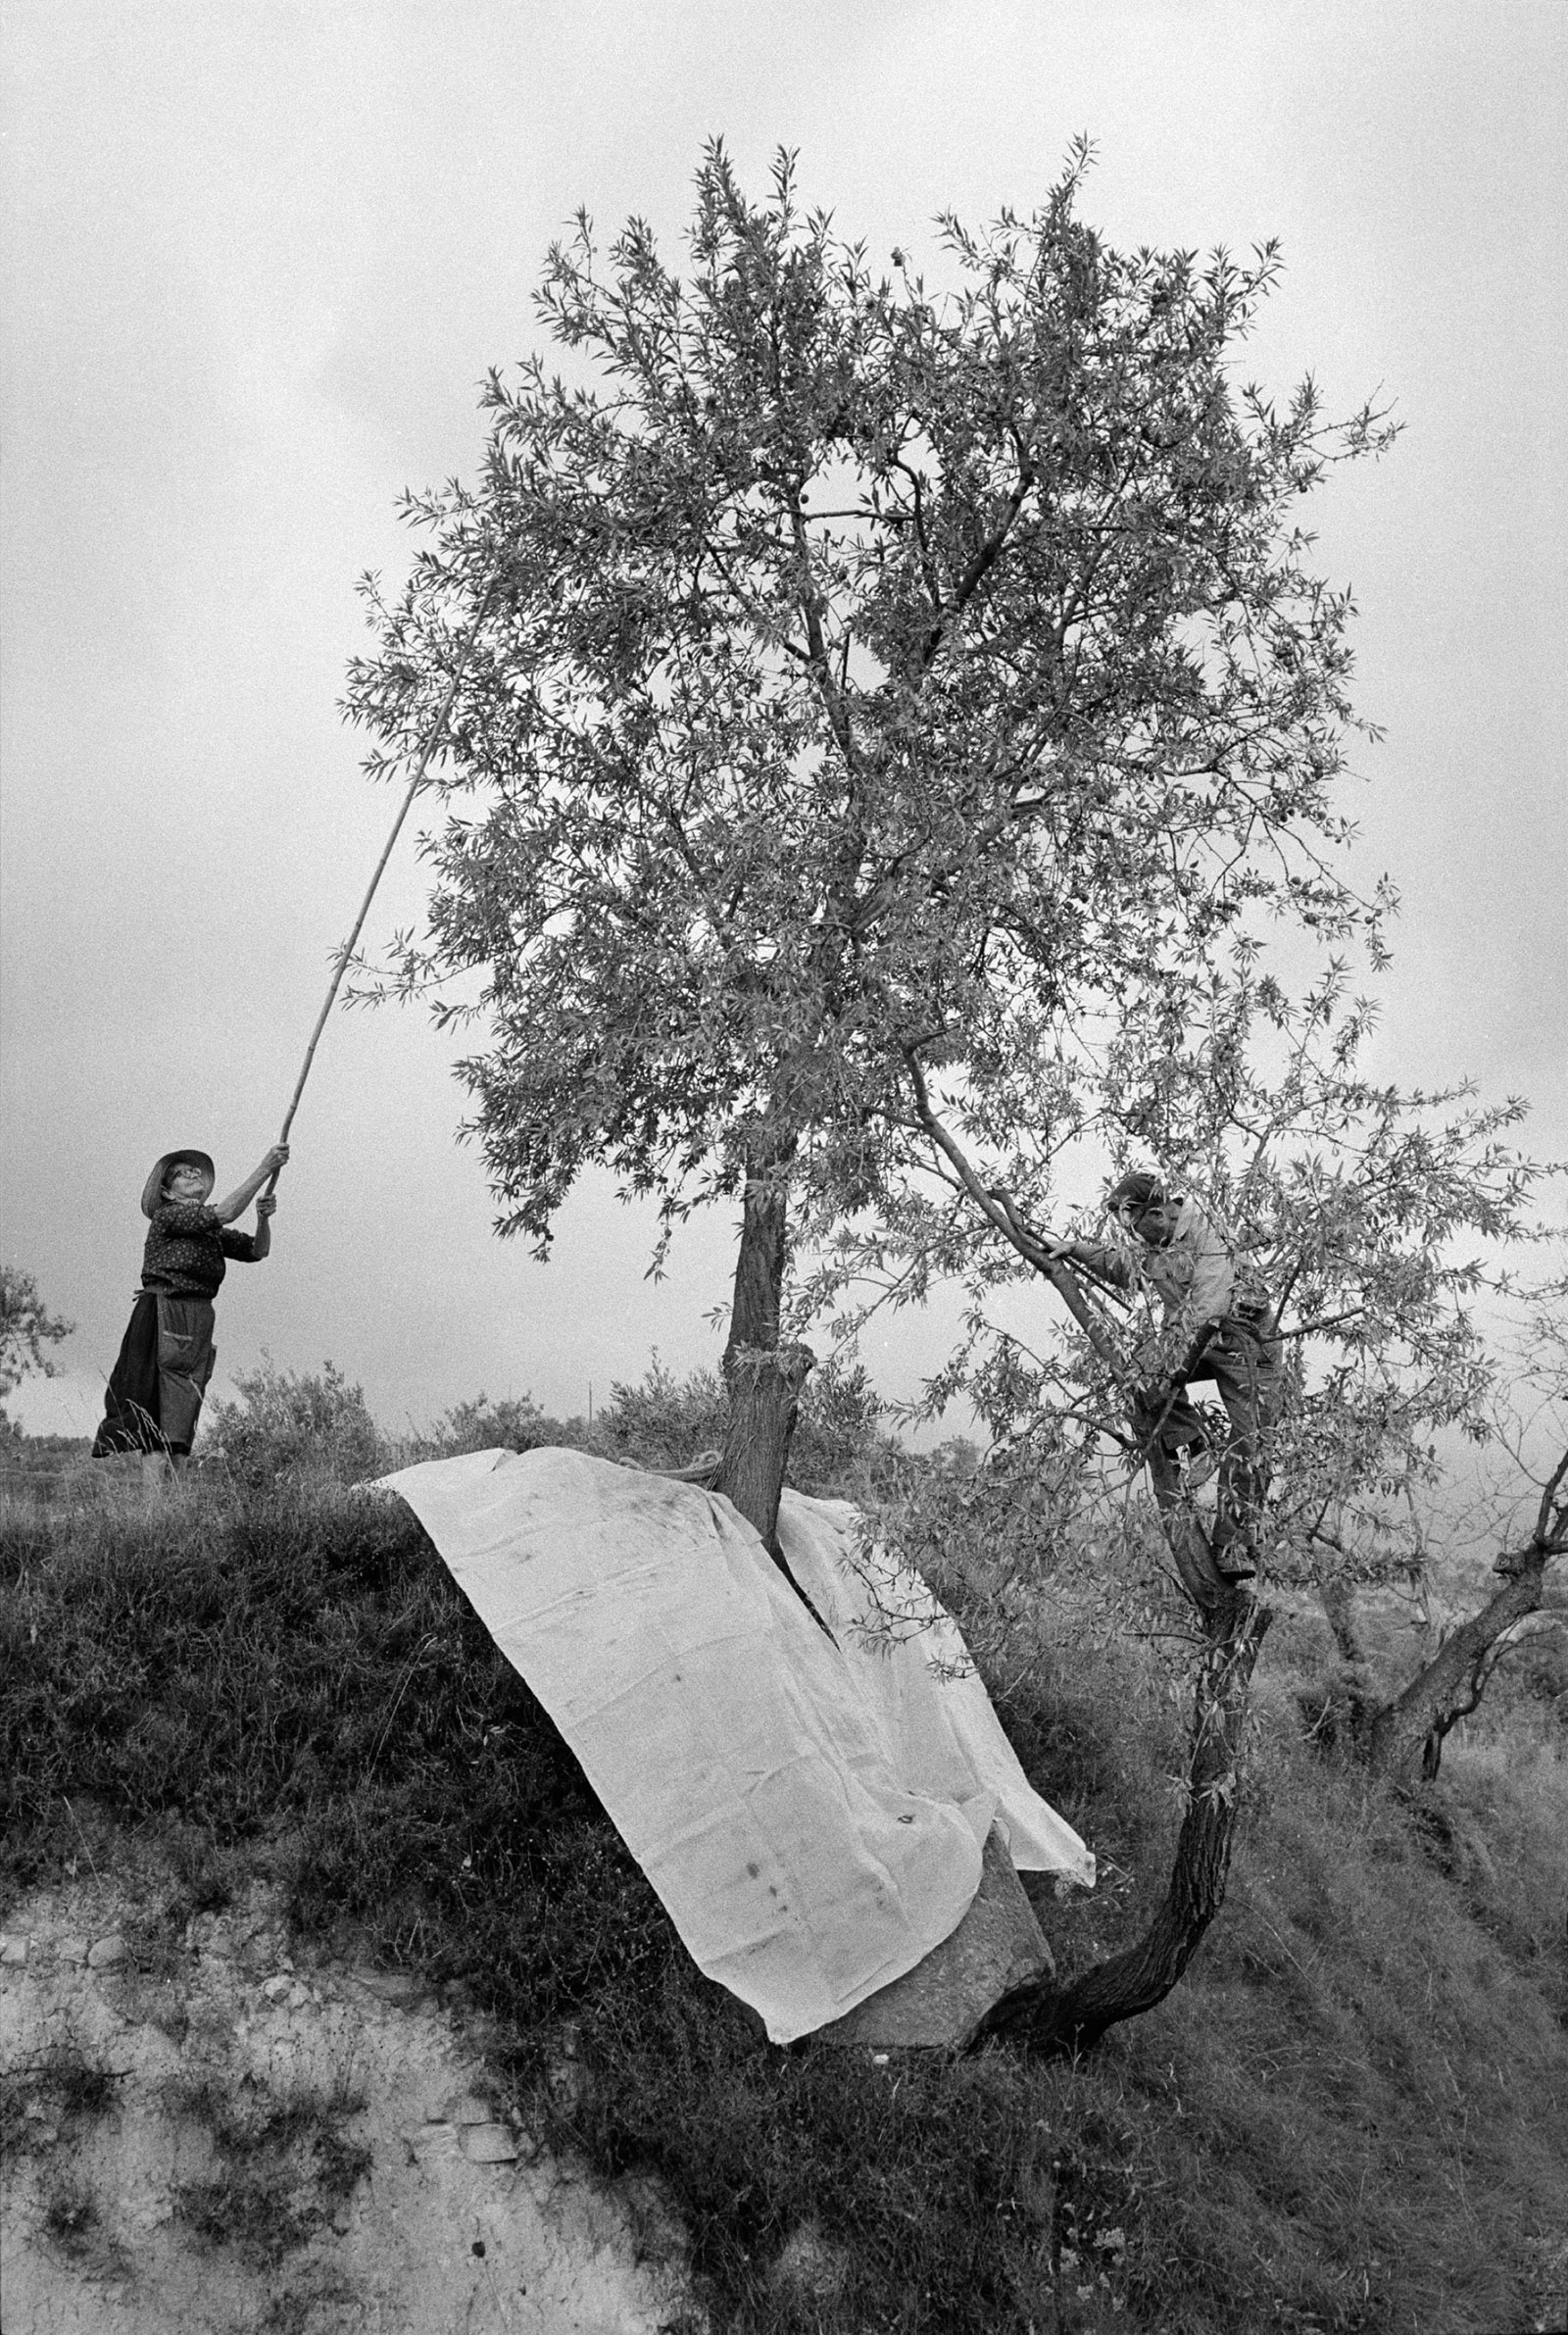 Gathering almonds in the Valencian town of Guadalest, Spain, September 1971; photograph by Guy Le Querrec